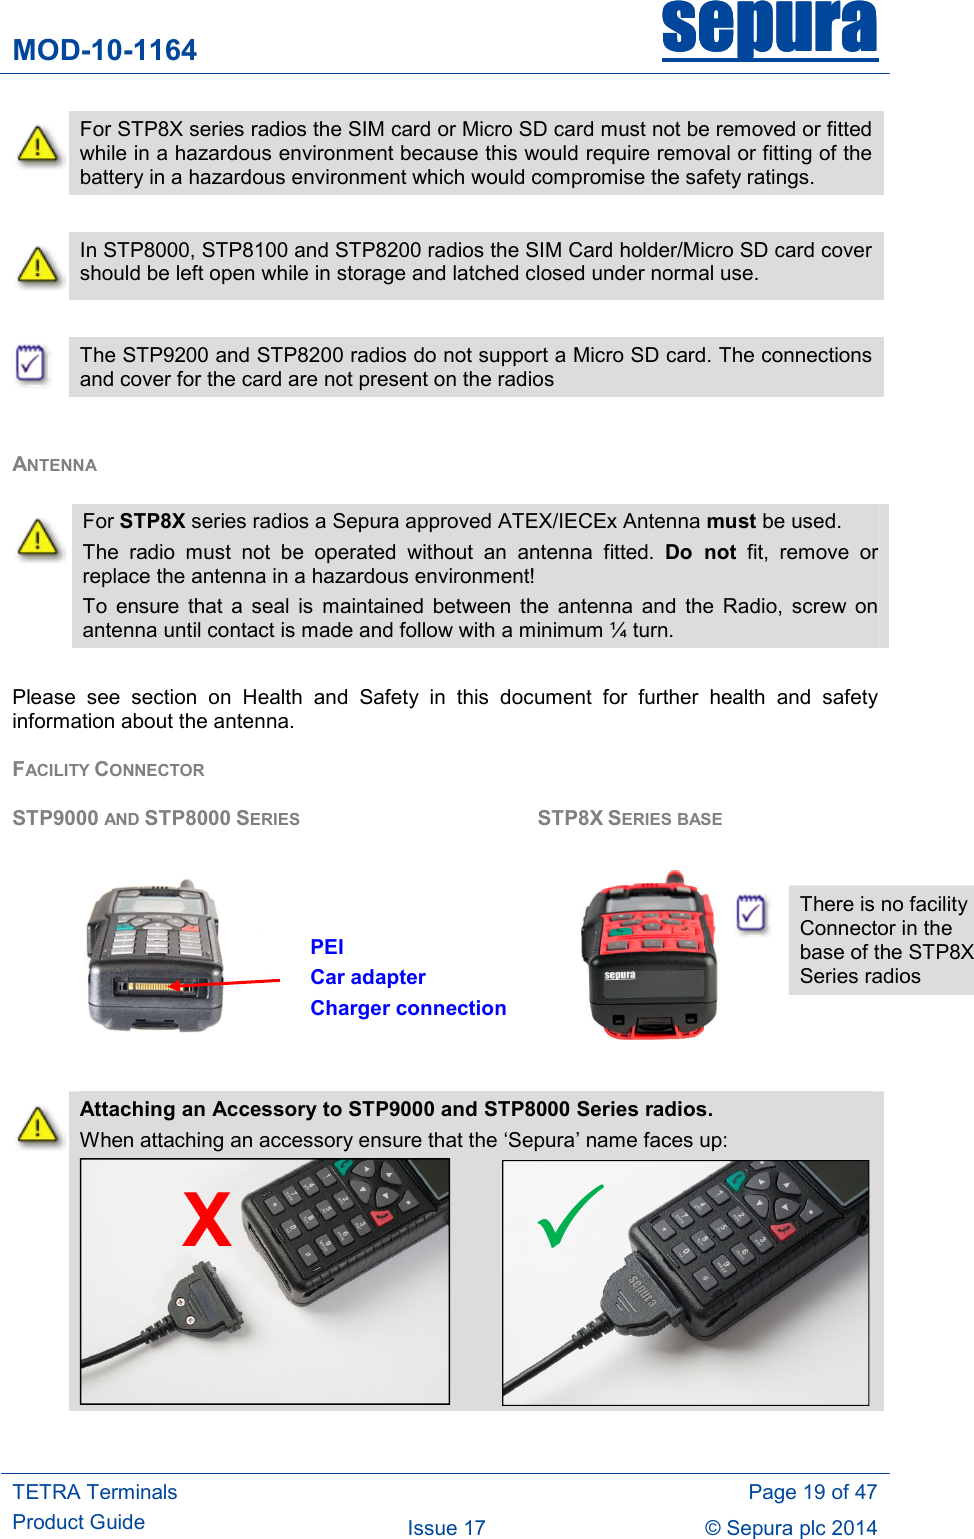 MOD-10-1164 sepurasepurasepurasepura     TETRA Terminals Product Guide   Page 19 of 47 Issue 17  © Sepura plc 2014    For STP8X series radios the SIM card or Micro SD card must not be removed or fitted while in a hazardous environment because this would require removal or fitting of the battery in a hazardous environment which would compromise the safety ratings.   In STP8000, STP8100 and STP8200 radios the SIM Card holder/Micro SD card cover should be left open while in storage and latched closed under normal use.   The STP9200 and STP8200 radios do not support a Micro SD card. The connections and cover for the card are not present on the radios  ANTENNA  Please  see  section  on  Health  and  Safety  in  this  document  for  further  health  and  safety information about the antenna. FACILITY CONNECTOR    STP9000 AND STP8000 SERIES        STP8X SERIES BASE                                                            Attaching an Accessory to STP9000 and STP8000 Series radios.  When attaching an accessory ensure that the ‘Sepura’ name faces up:      For STP8X series radios a Sepura approved ATEX/IECEx Antenna must be used. The  radio  must  not  be  operated  without  an  antenna  fitted.  Do  not  fit,  remove  or replace the antenna in a hazardous environment! To  ensure  that  a  seal  is  maintained  between  the  antenna  and  the  Radio,  screw  on antenna until contact is made and follow with a minimum ¼ turn. X PEI Car adapter Charger connection   There is no facility Connector in the base of the STP8X Series radios  